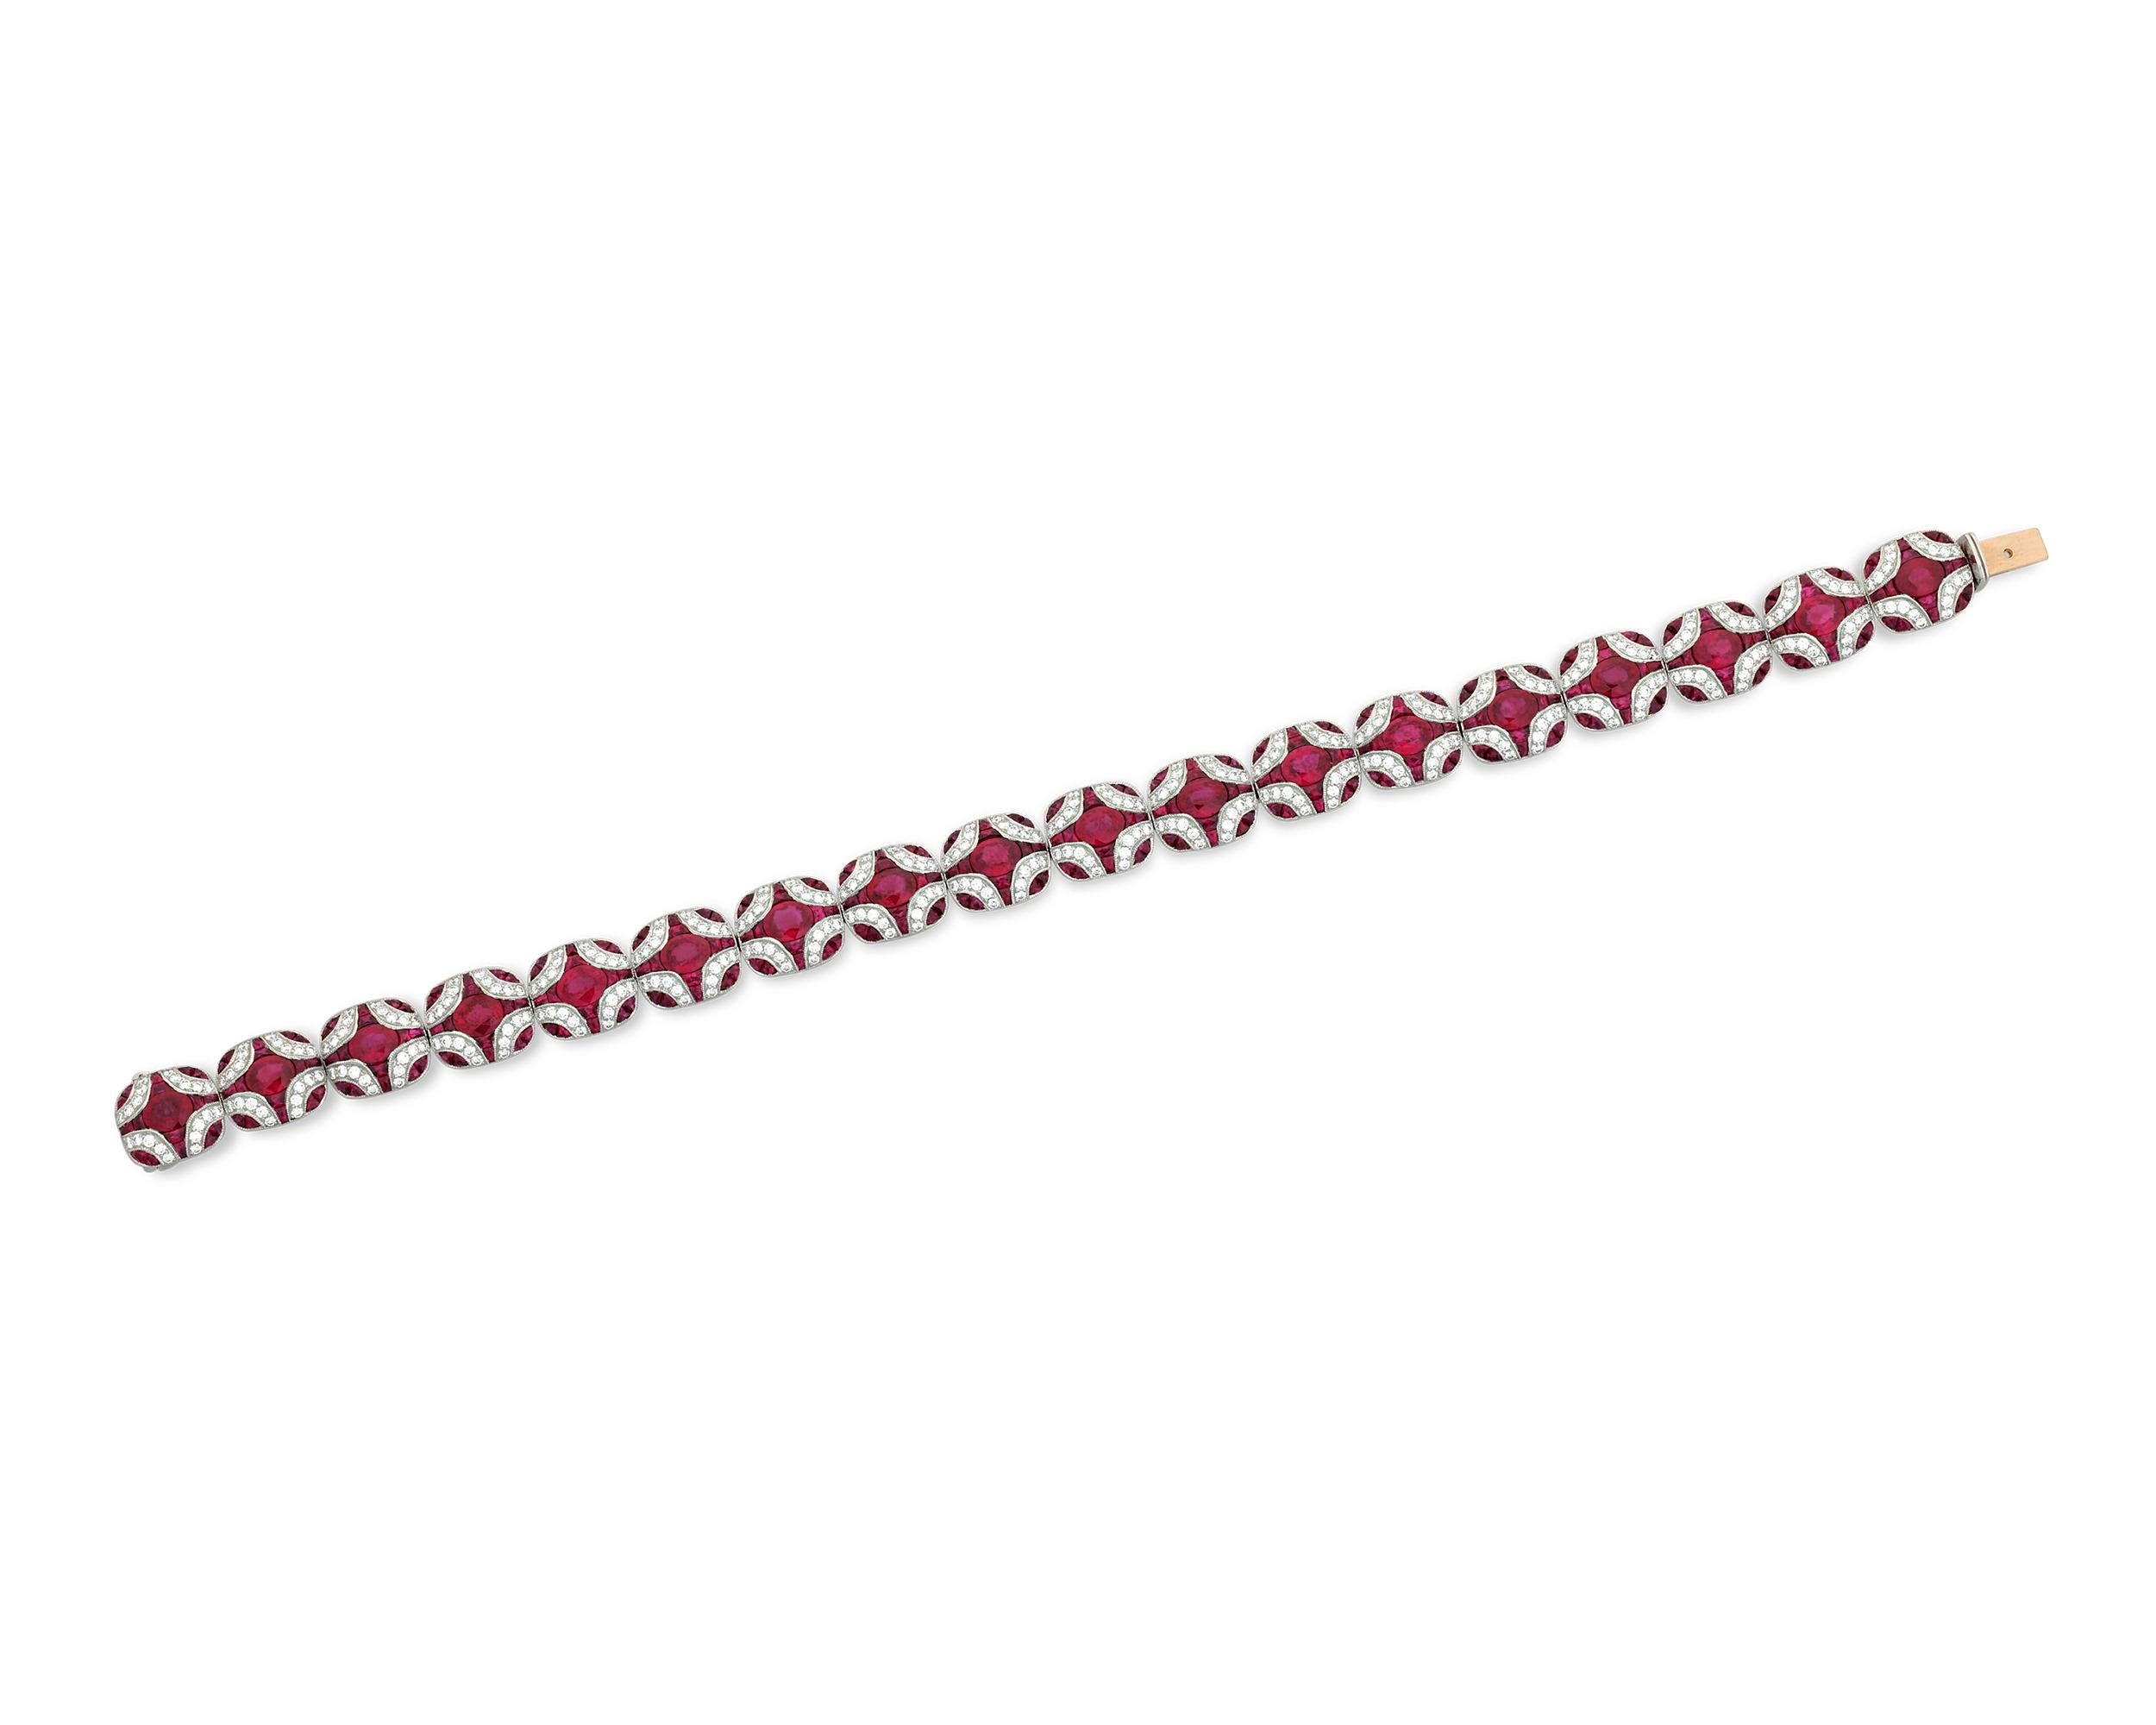 Resplendent rubies totaling 10.25 carats display their magnificent crimson color in this dazzling platinum bracelet. The 18 larger rubies comprise 5.65 carats, while the smaller 288 rubies account for 4.60 carats. Accentuating these lavish gems are